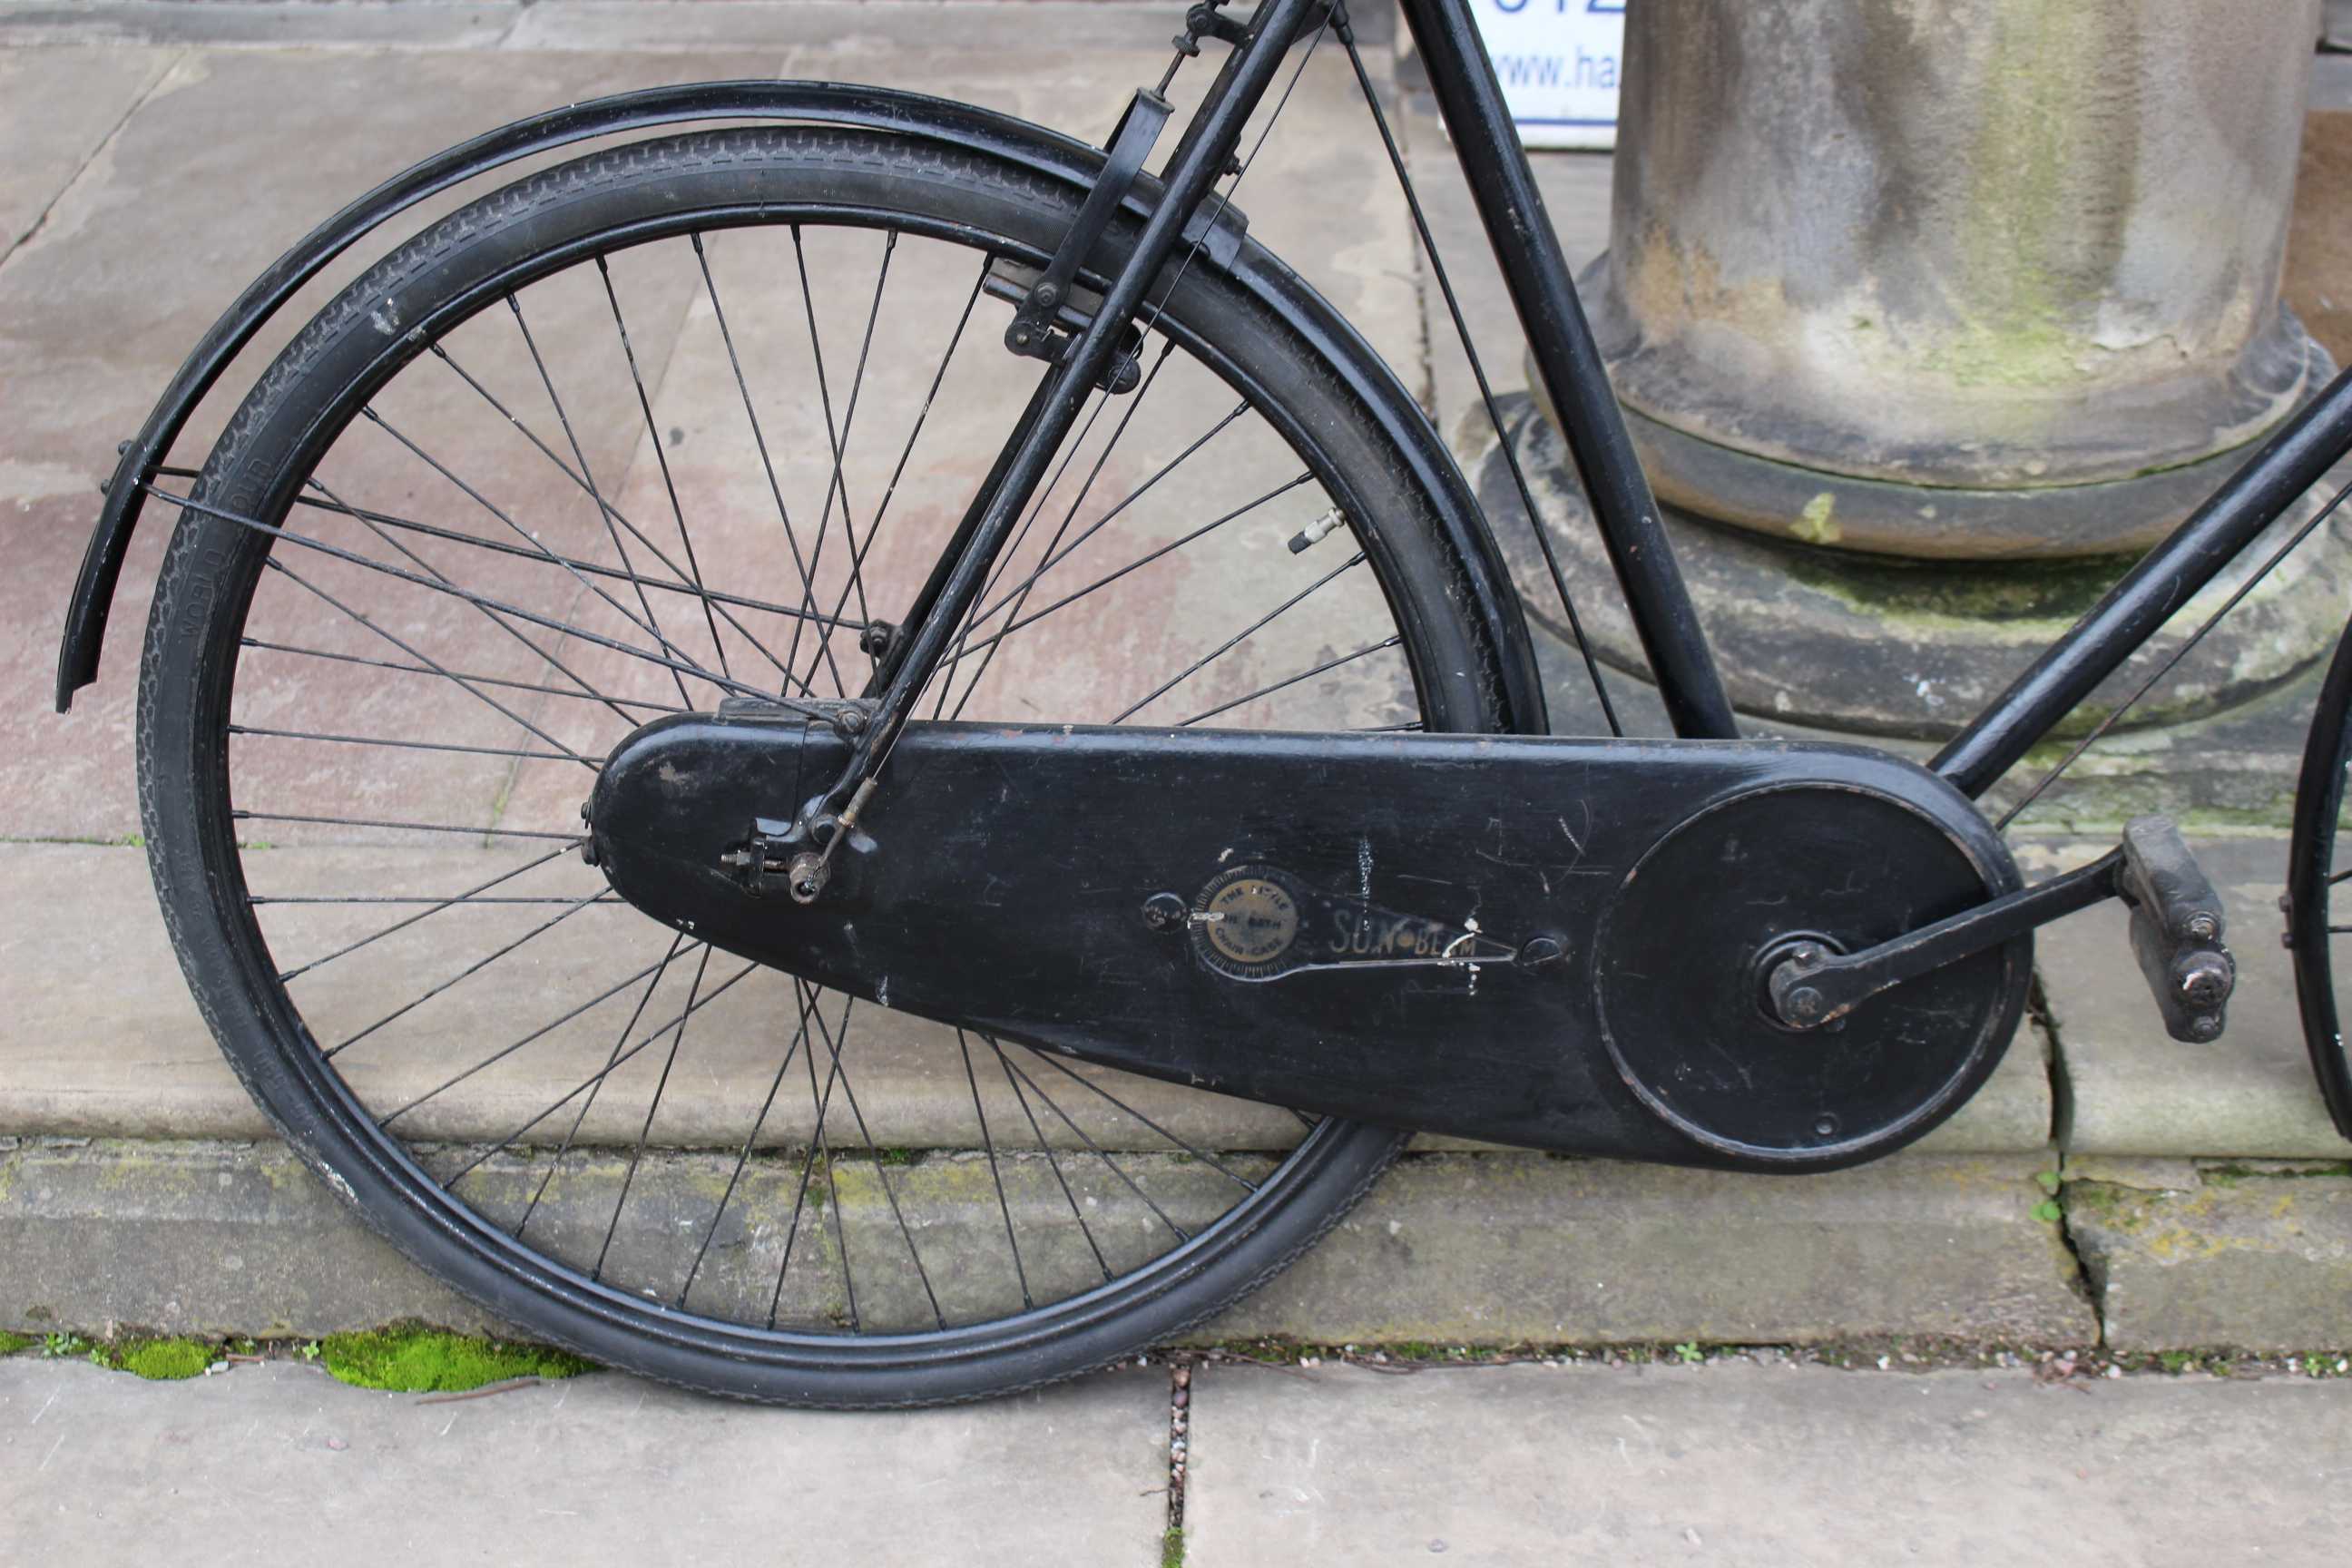 A 1943 BSA Sunbeam roadster bicycle, austerity model with oil bath chain case with original decal, - Image 2 of 6